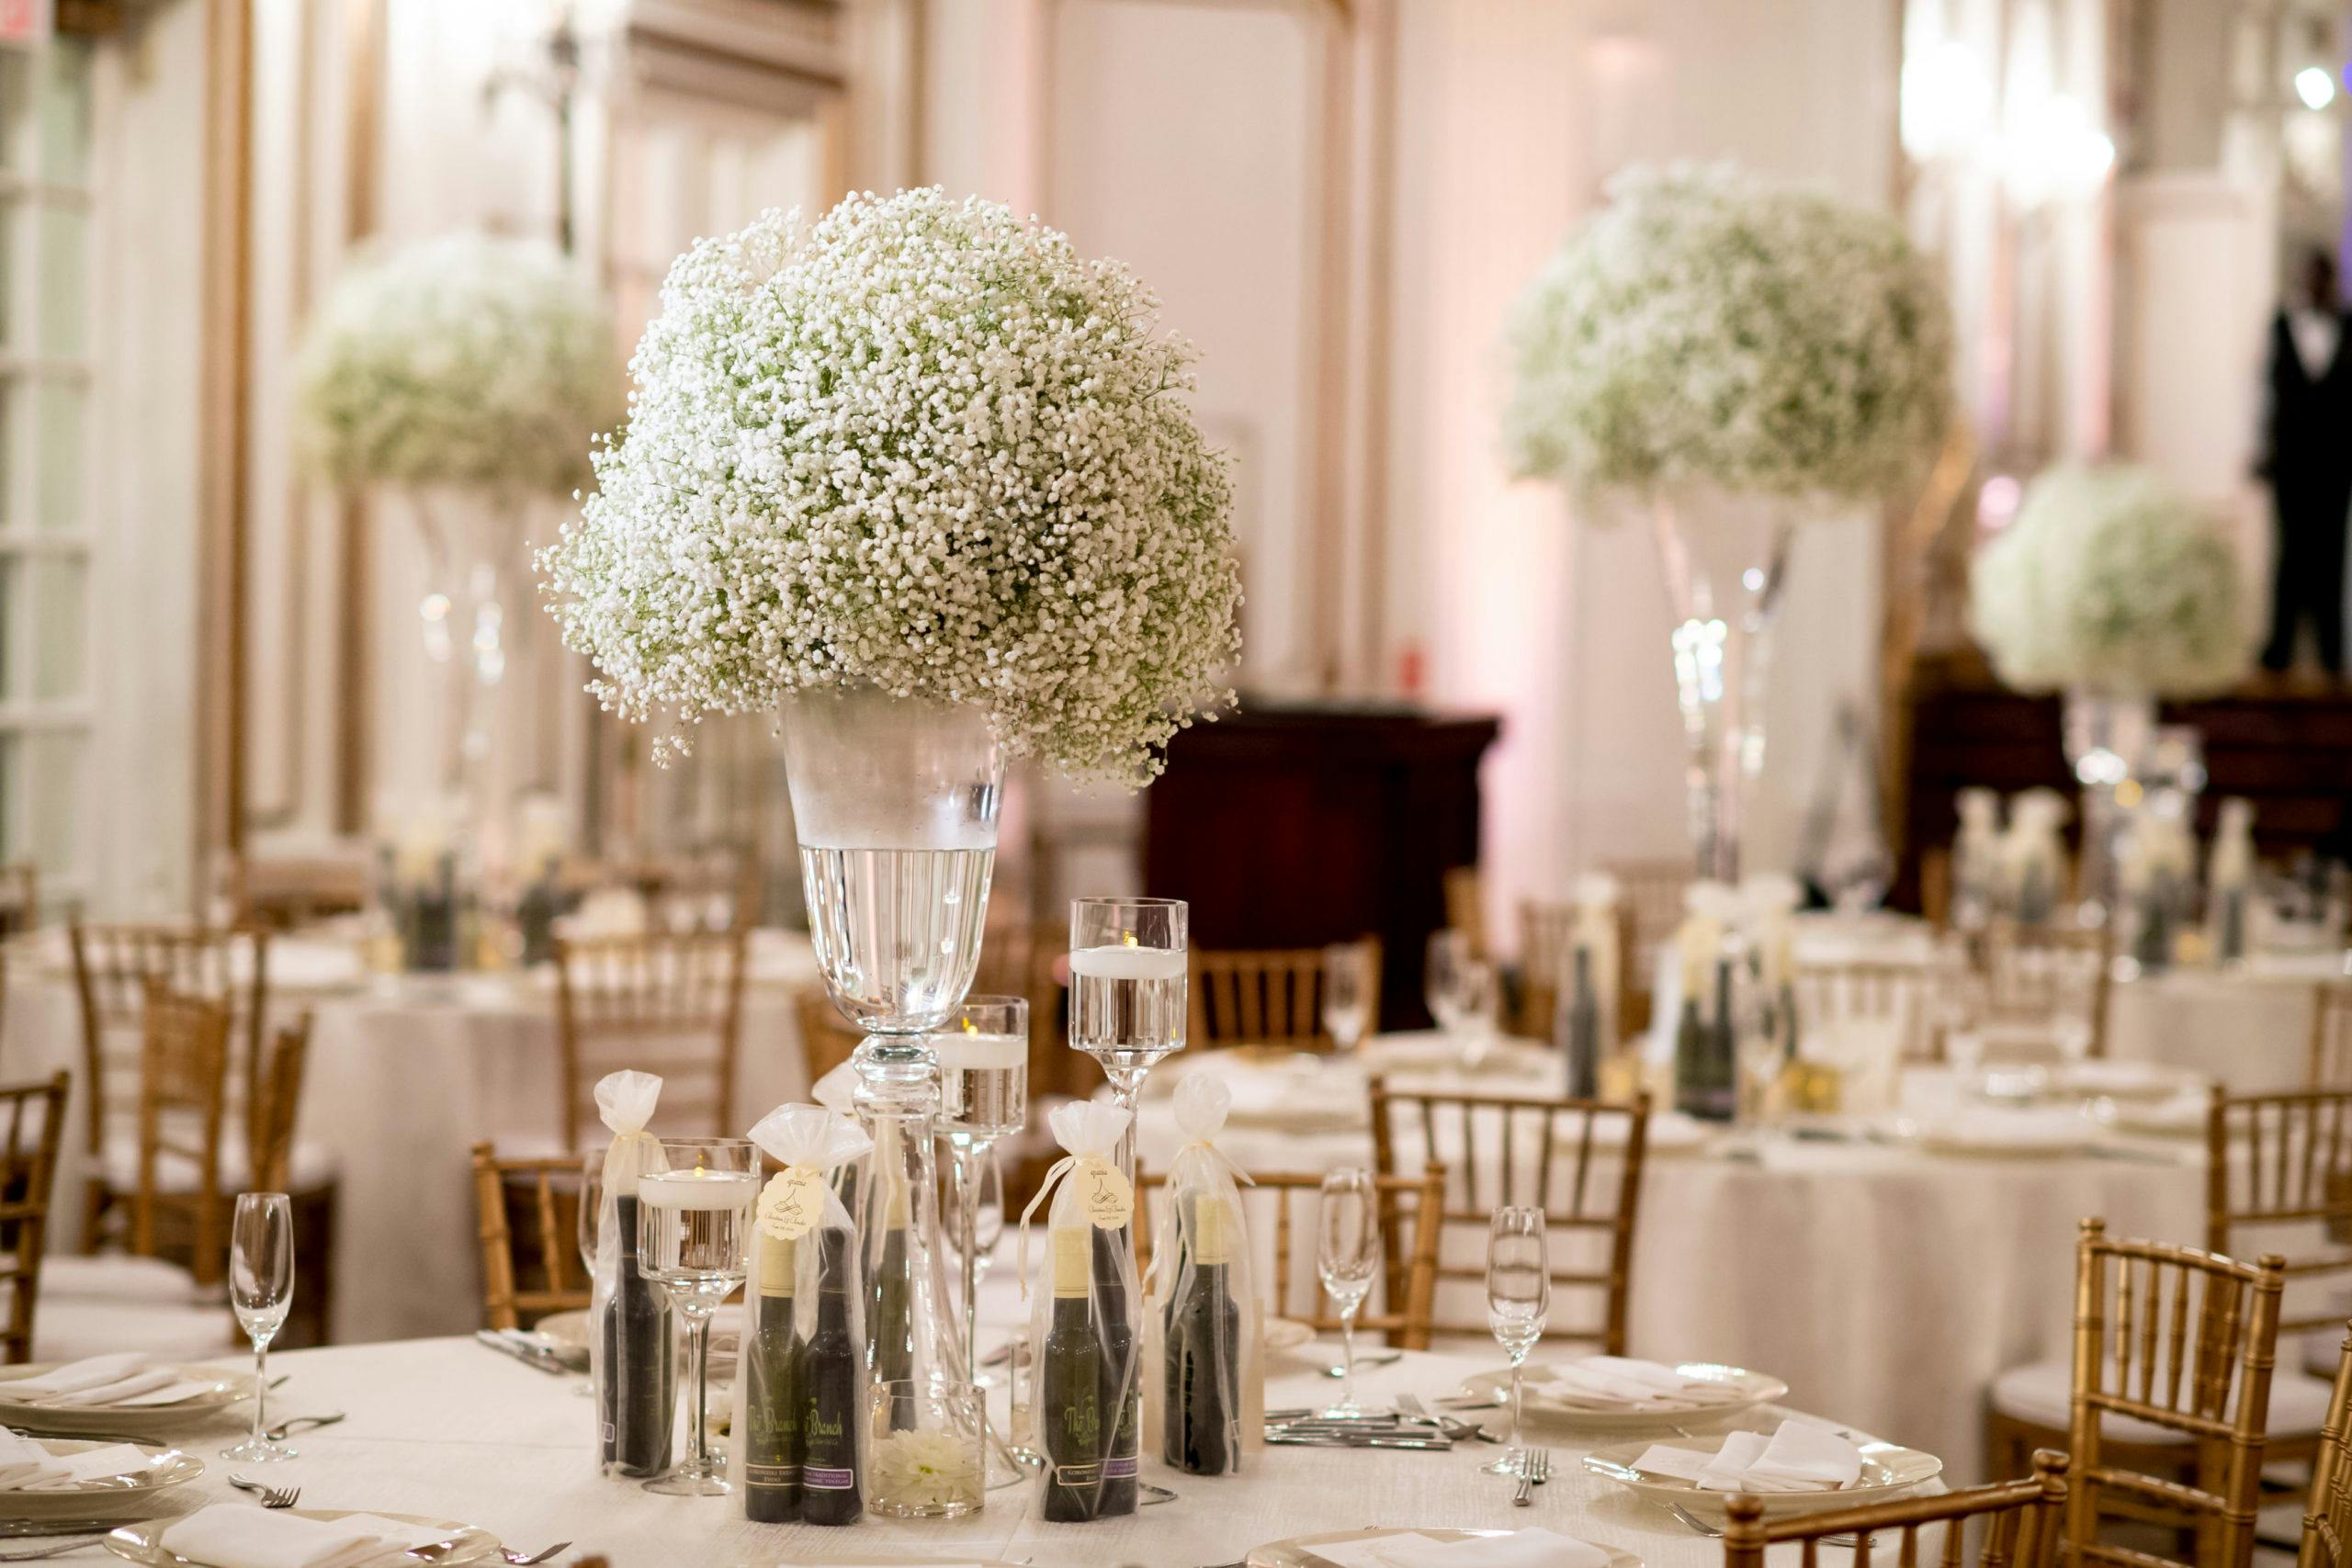 Bouquets of Baby’s Breath Wedding Centerpieces At Varying Heights | PartySlate